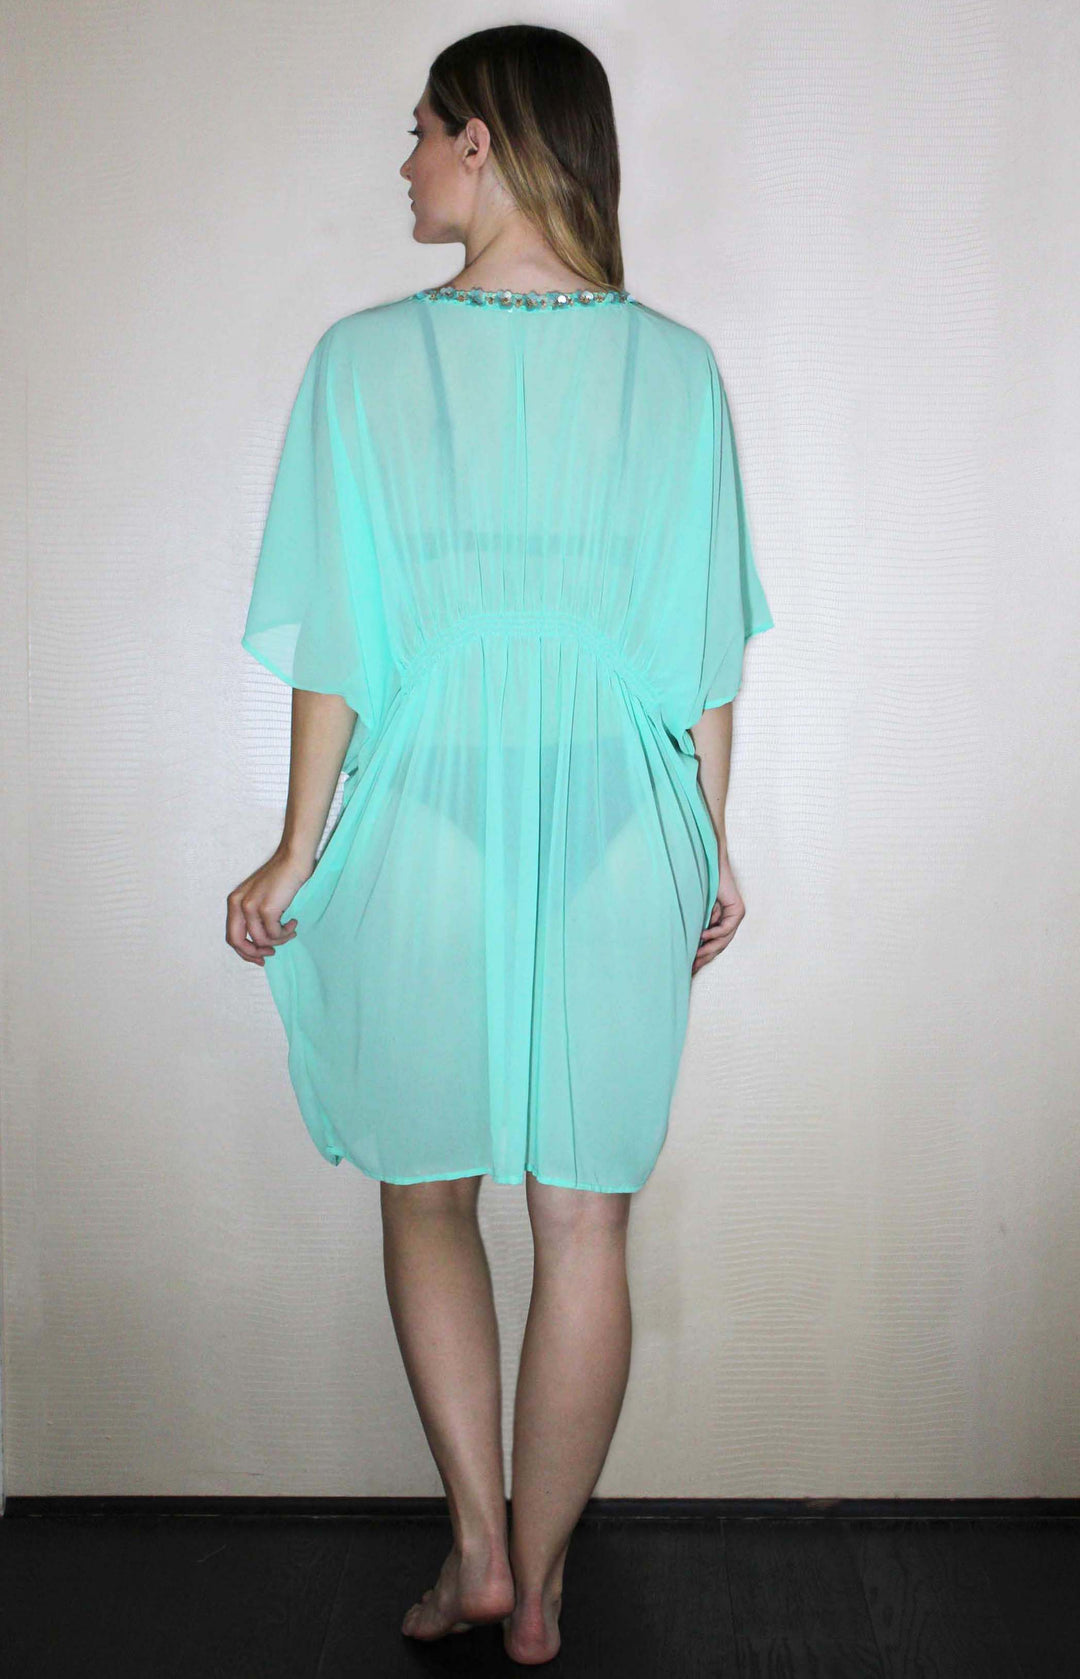 Short Mint Kaftan With Embroidered Detailing